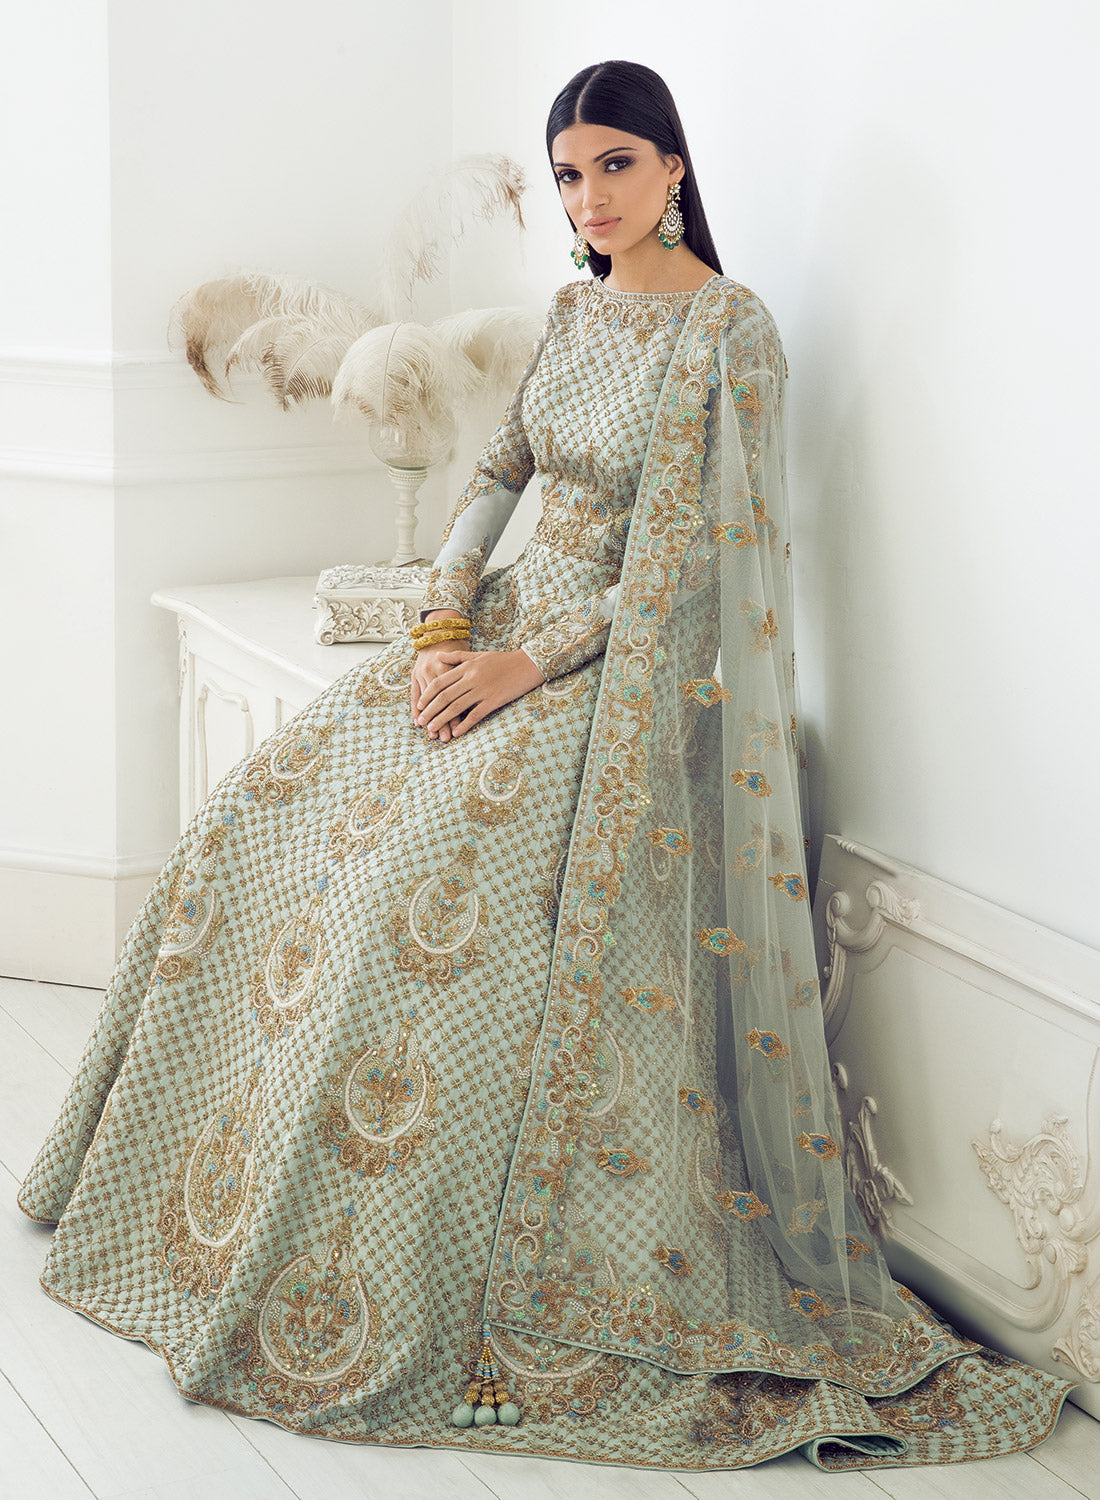 A Breakdown of the Classic North Indian Bride Avatar to Help You Ace the  Look